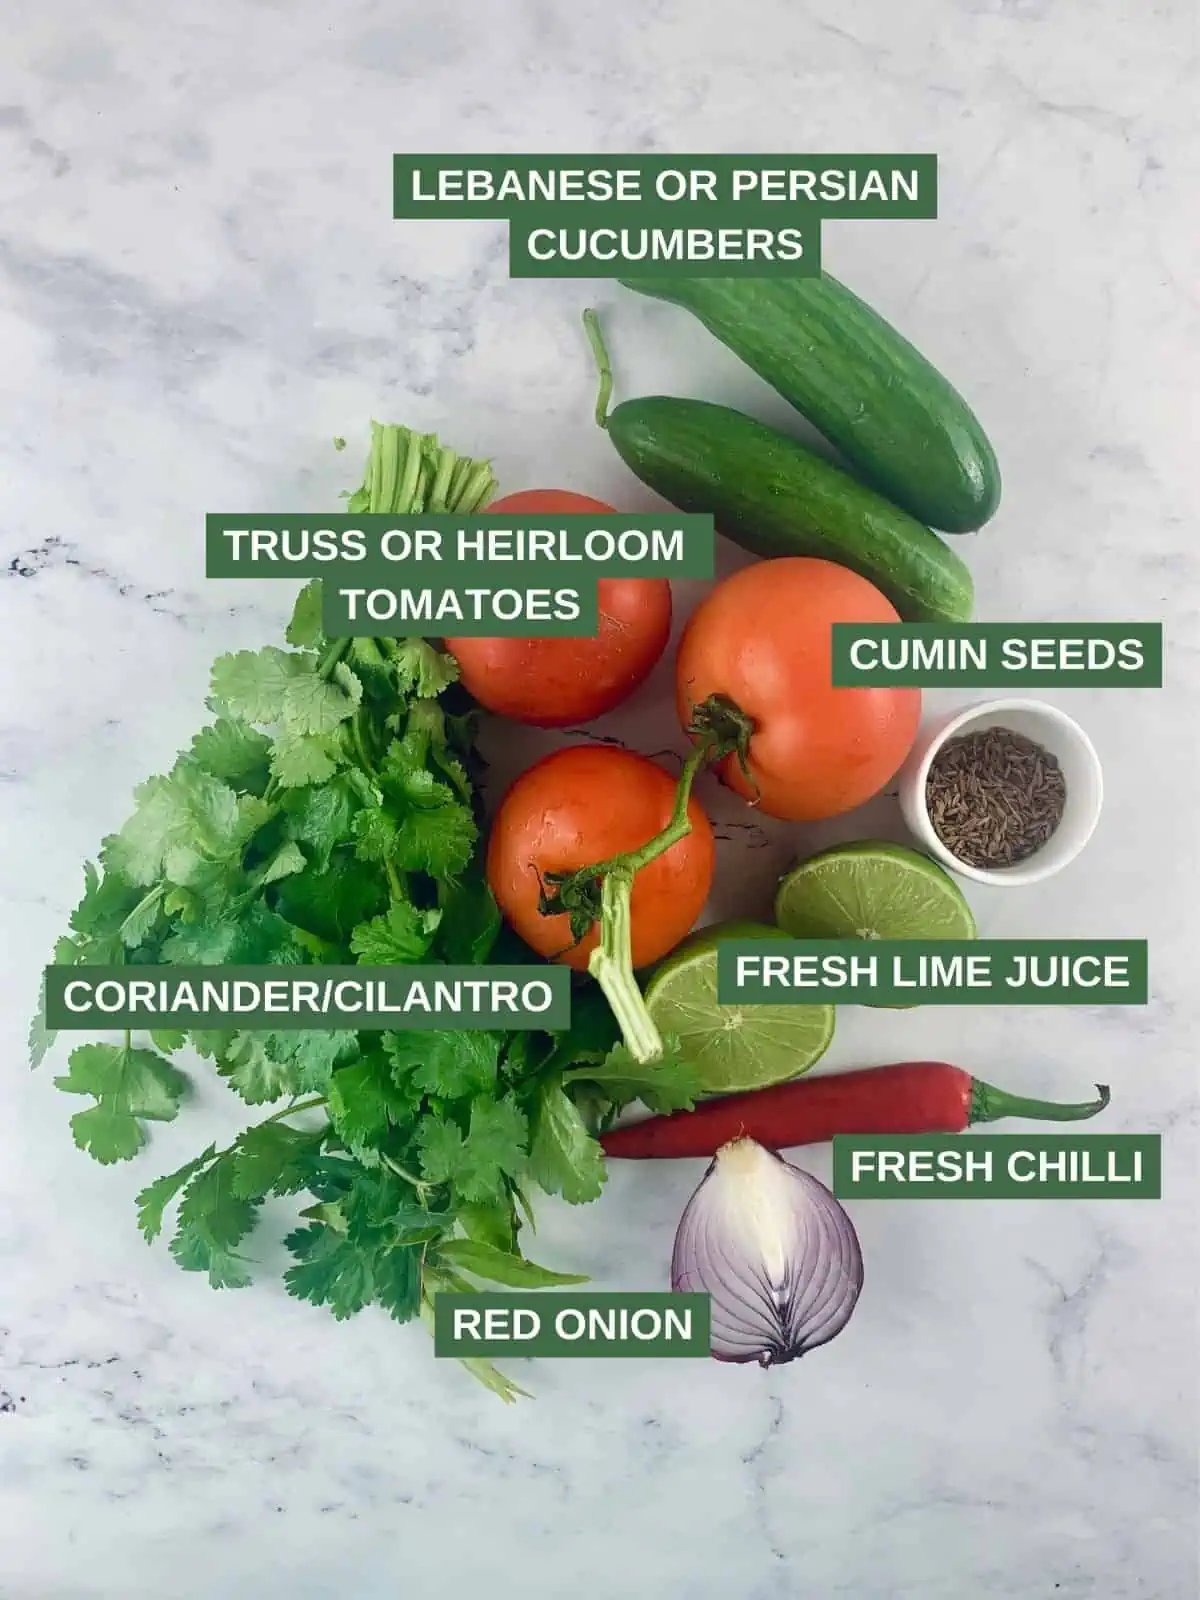 Labelled ingredients needed to make a kachumber salad.